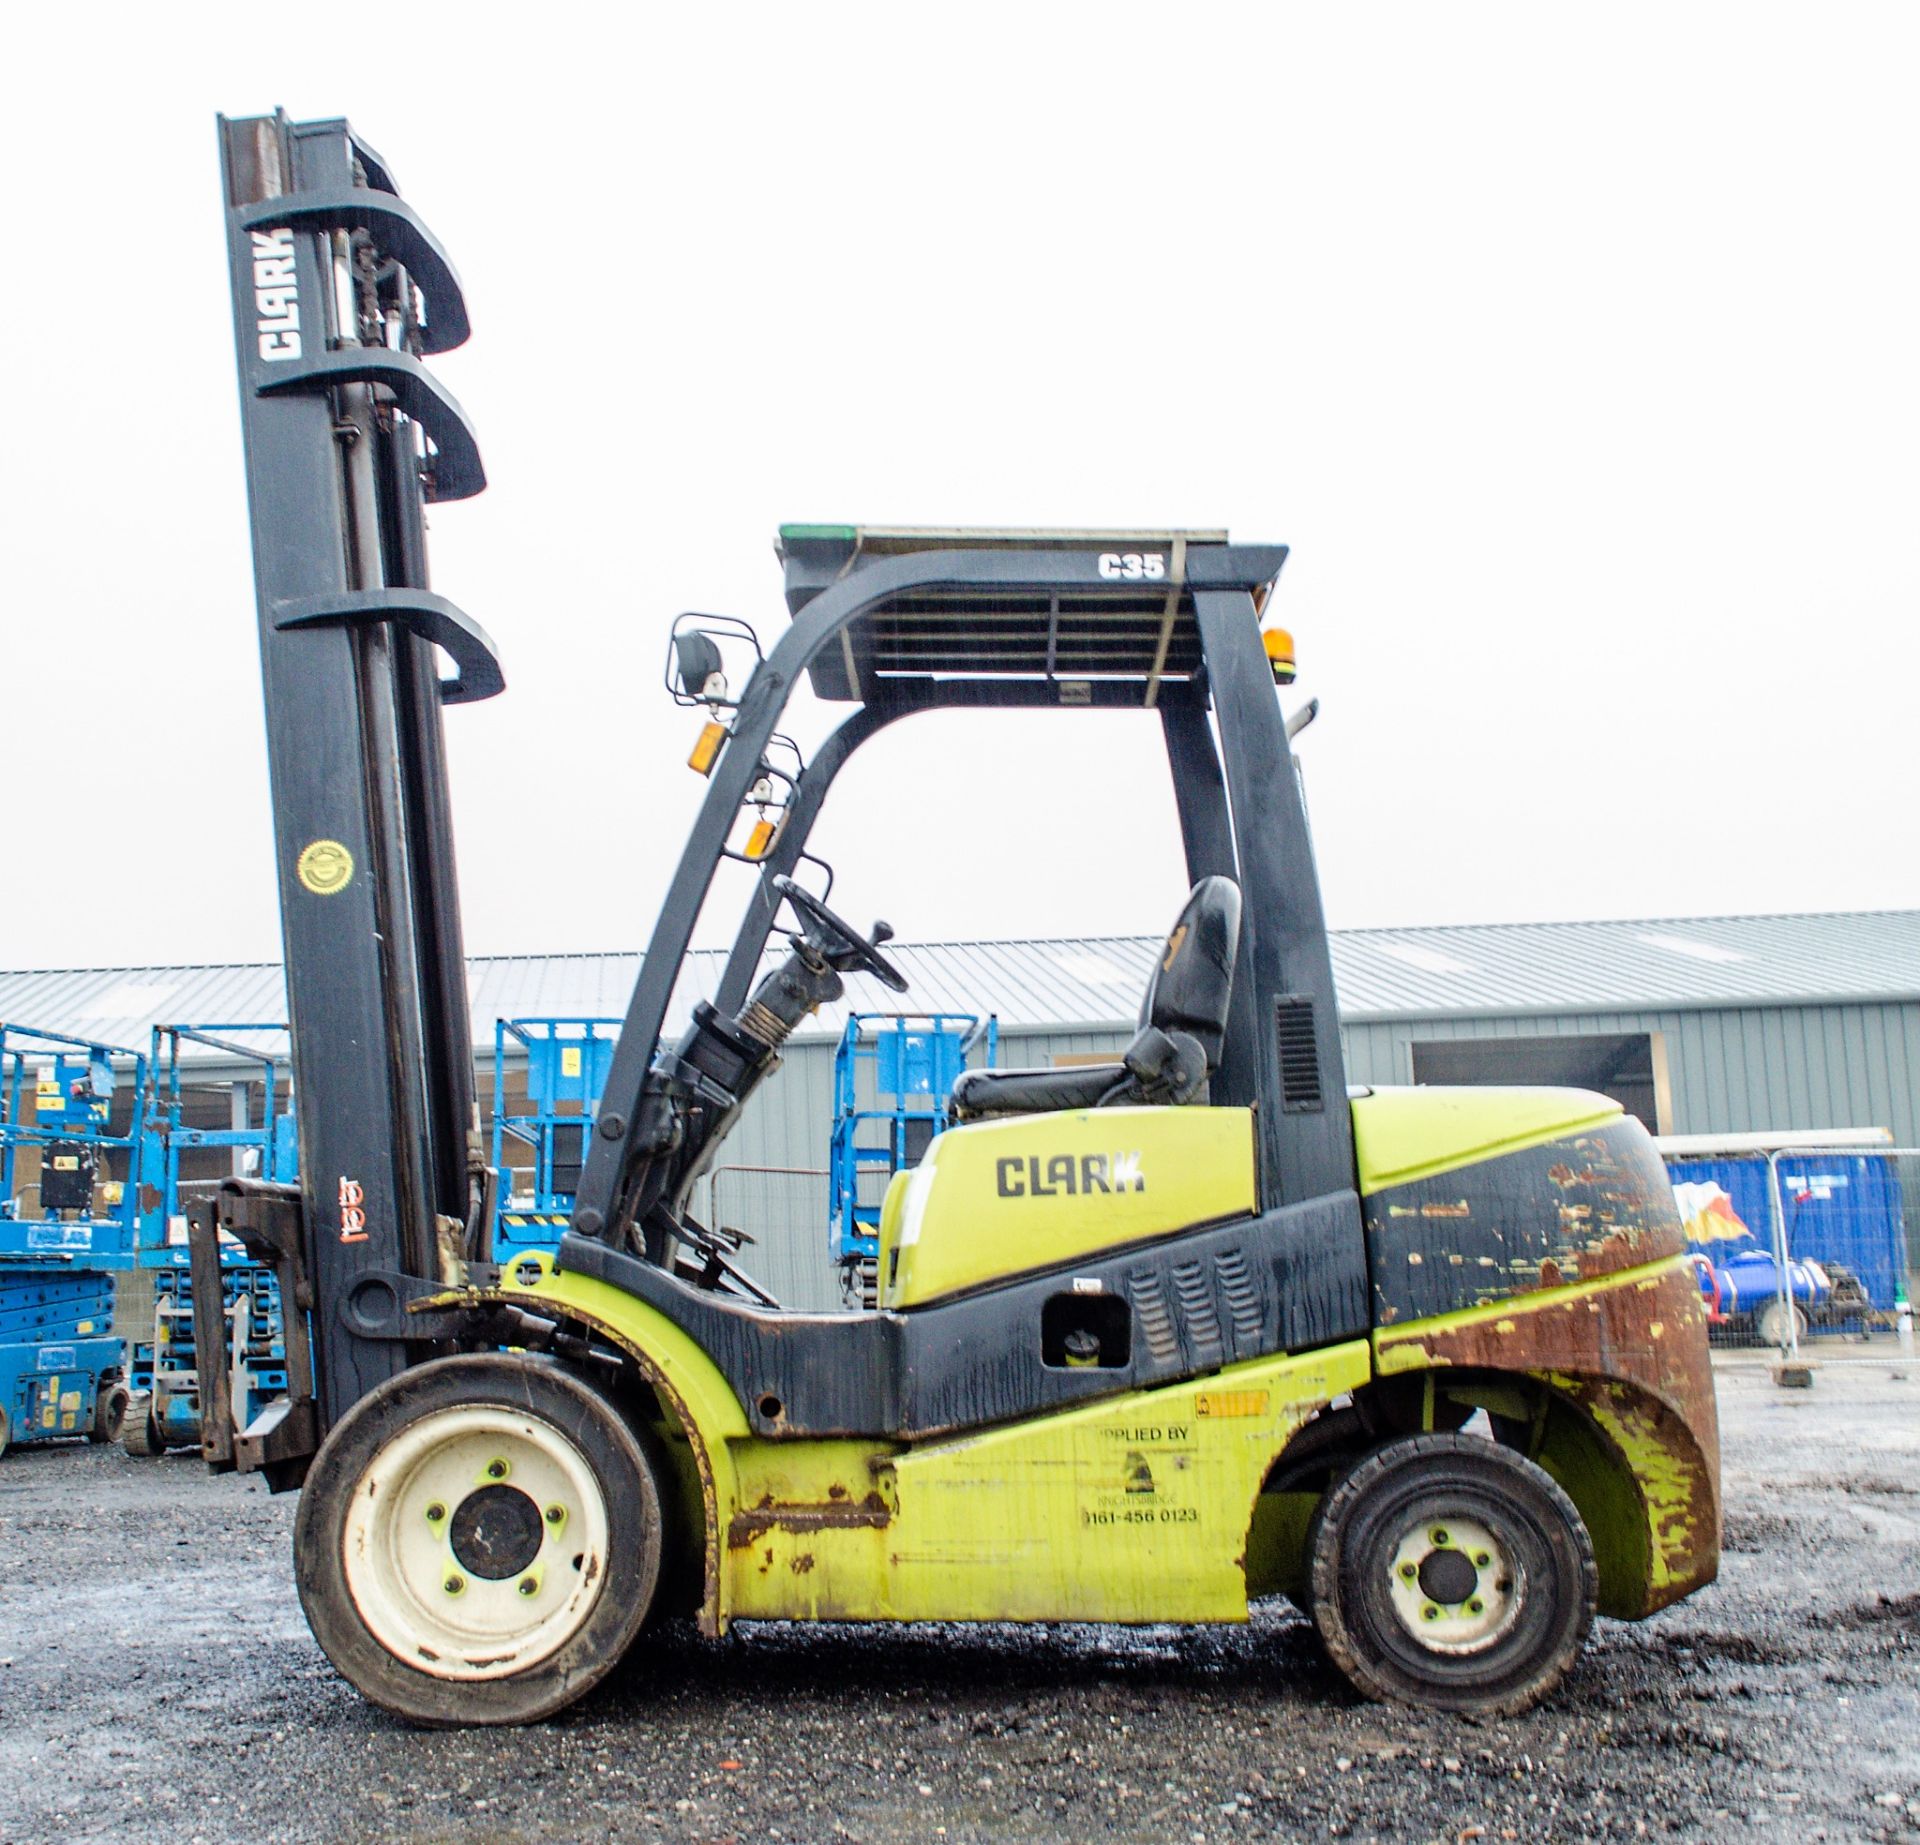 Clark C35 3.5 tonne diesel driven fork lift truck Year: 2014 S/N: 2518-9843 Recorded Hours: 4744 AP - Image 7 of 15